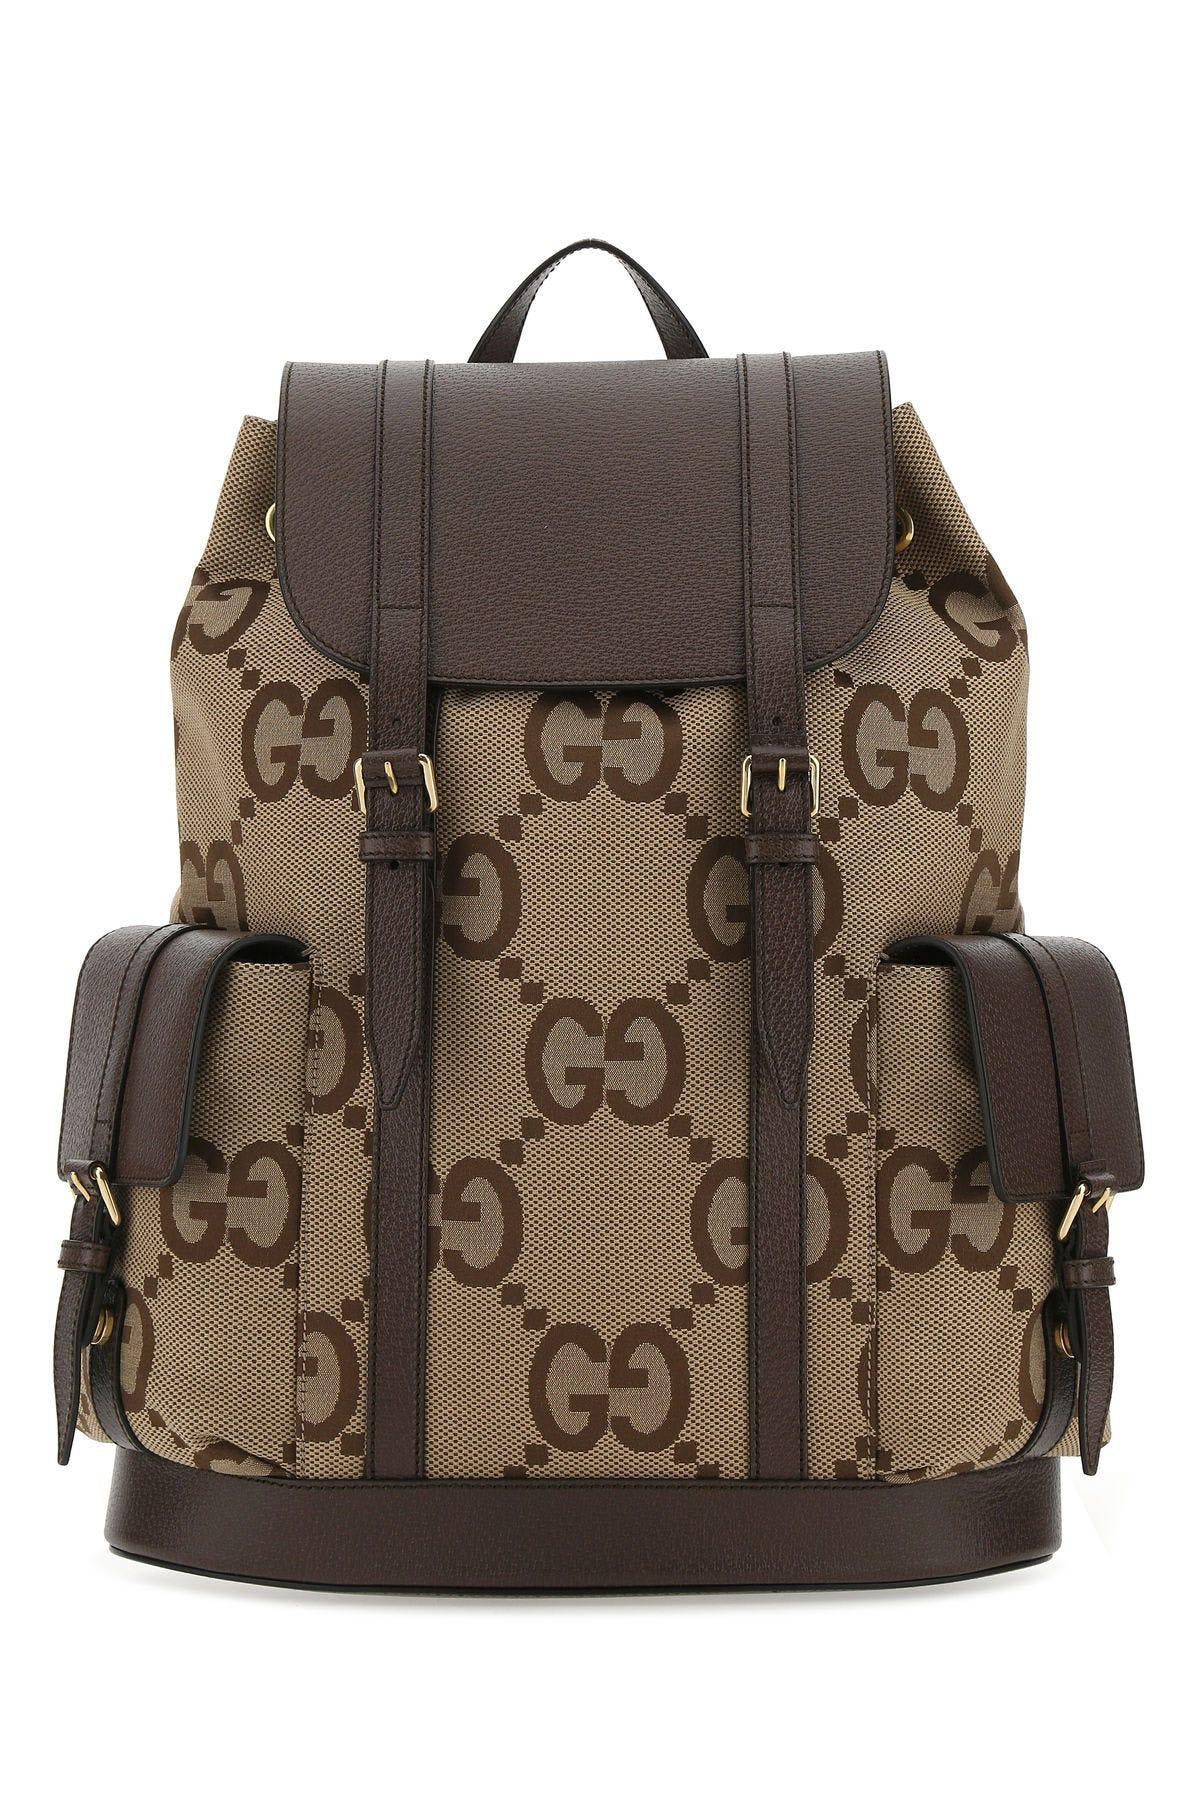 Gucci Multicolor Jumbo Gg Fabric And Leather Backpack In Beige